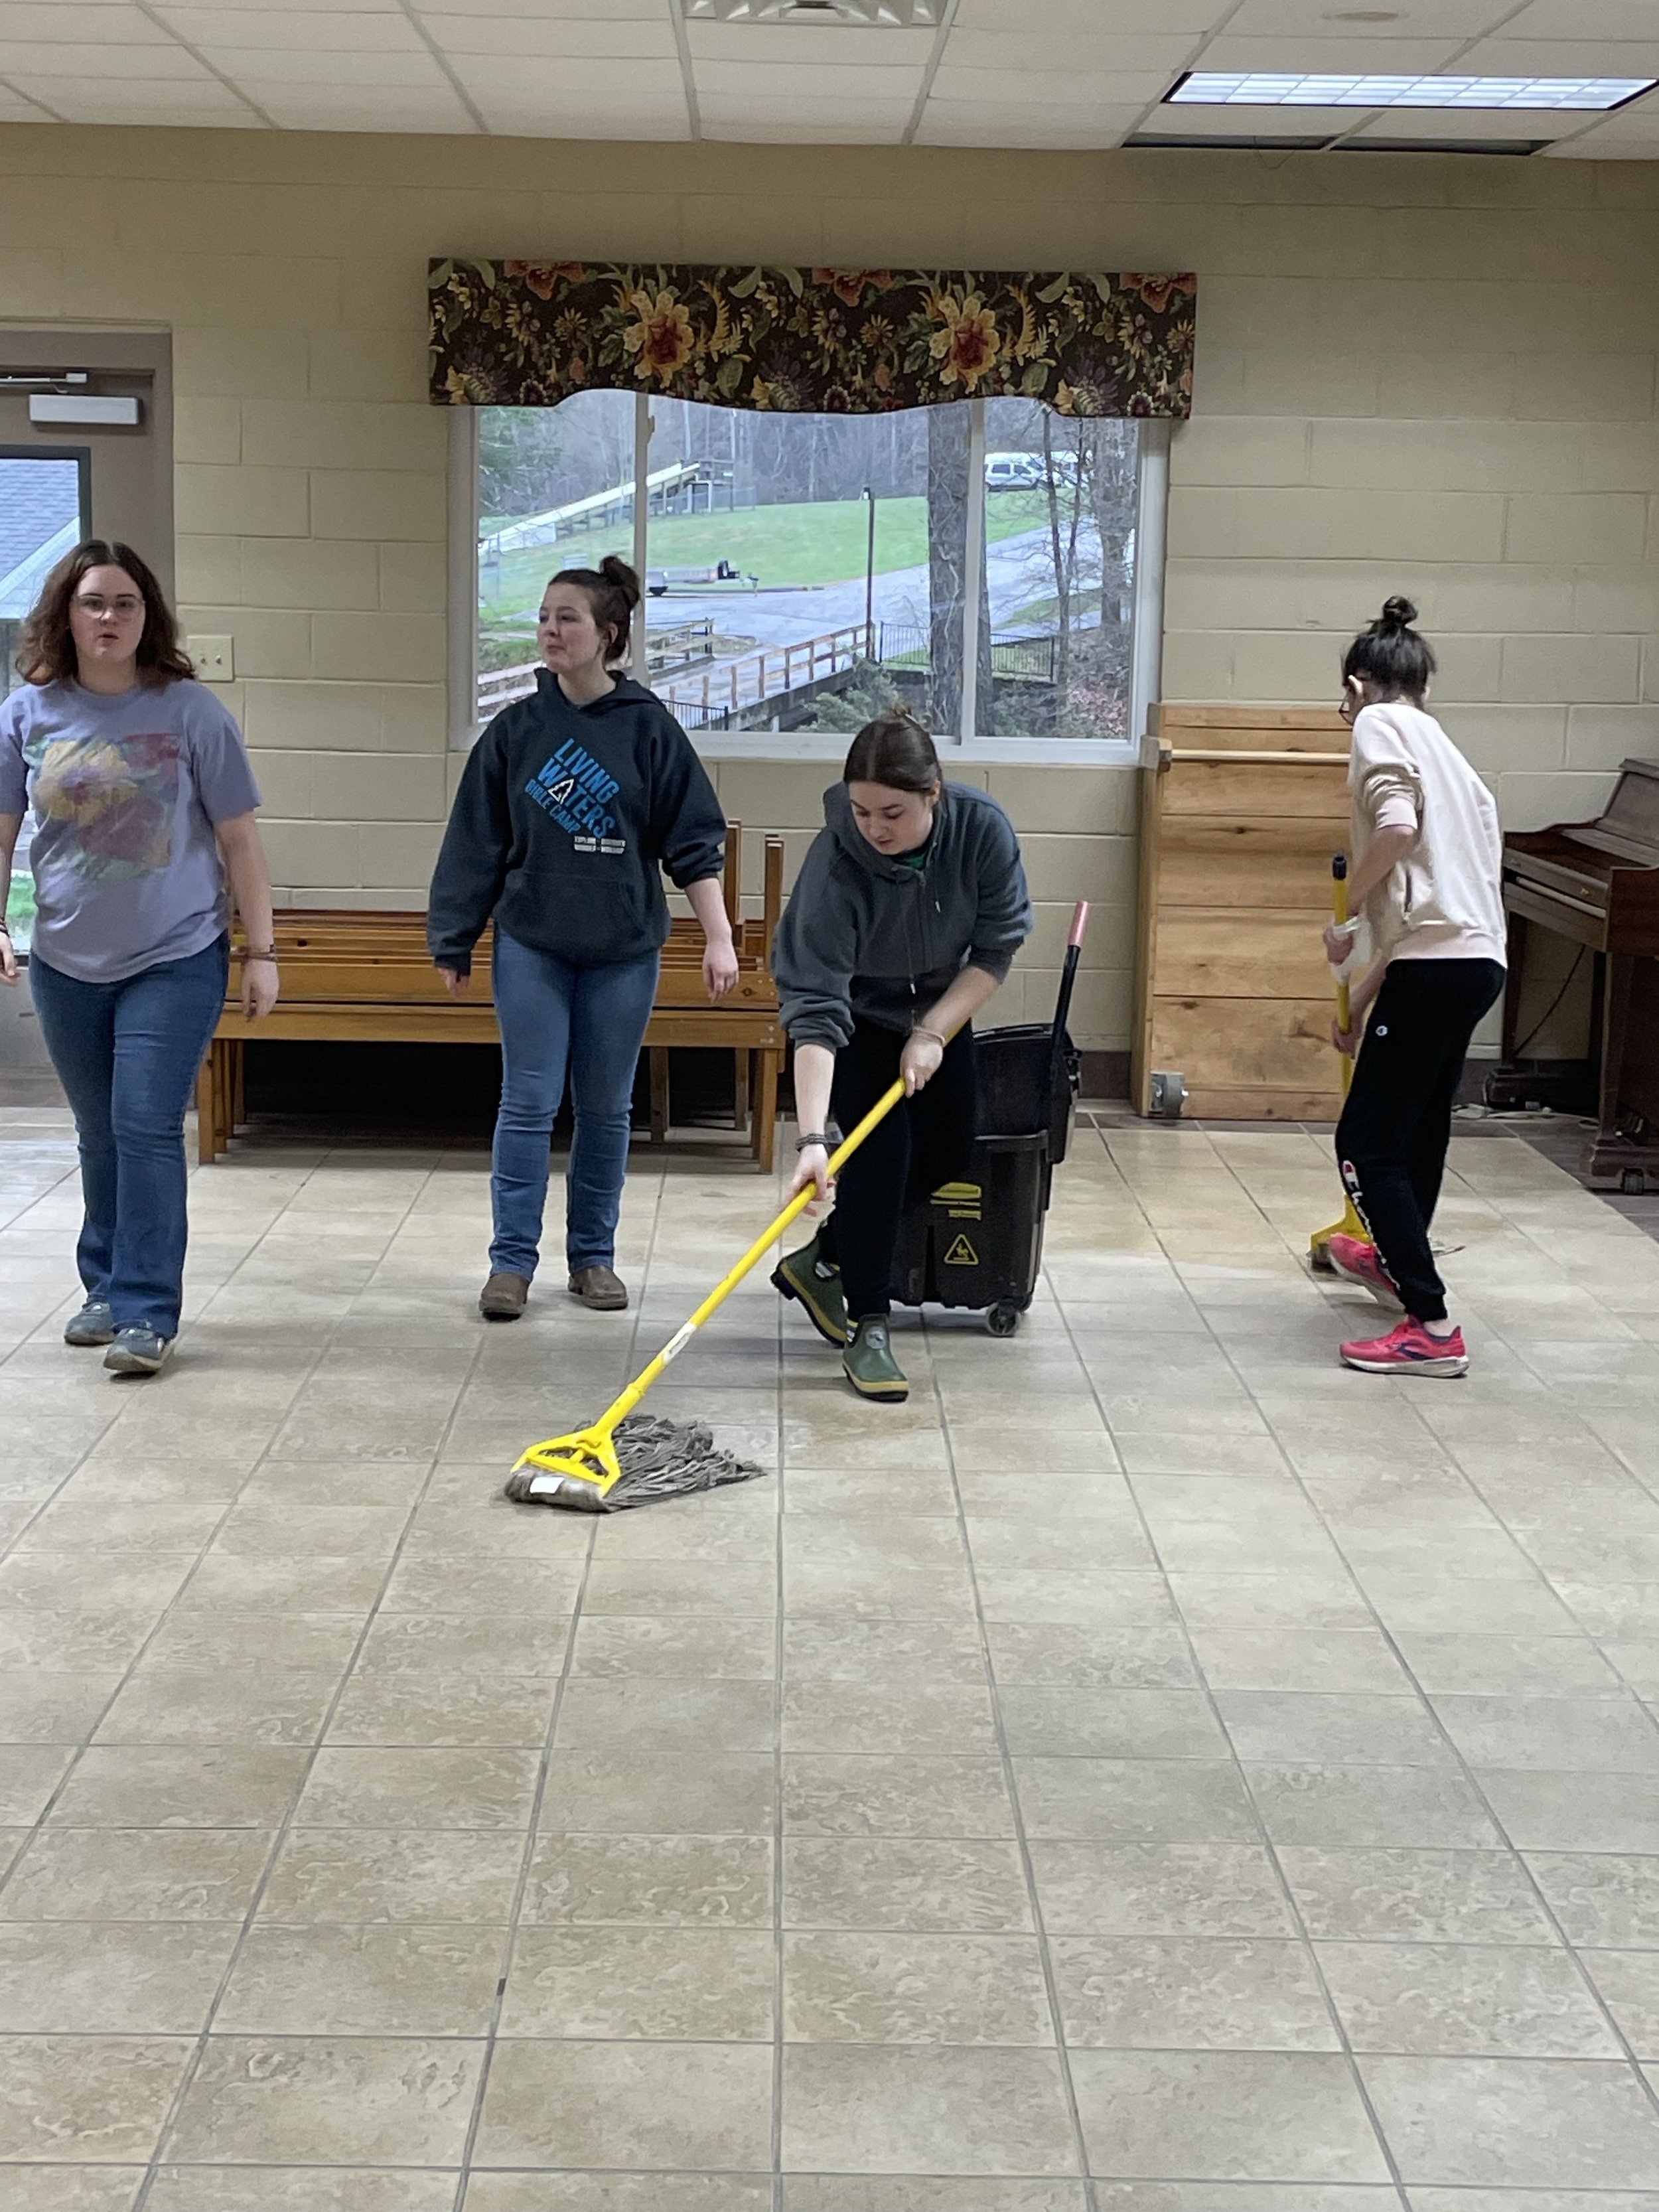 youth-group-csbf-cleaning-building-mop.jpg